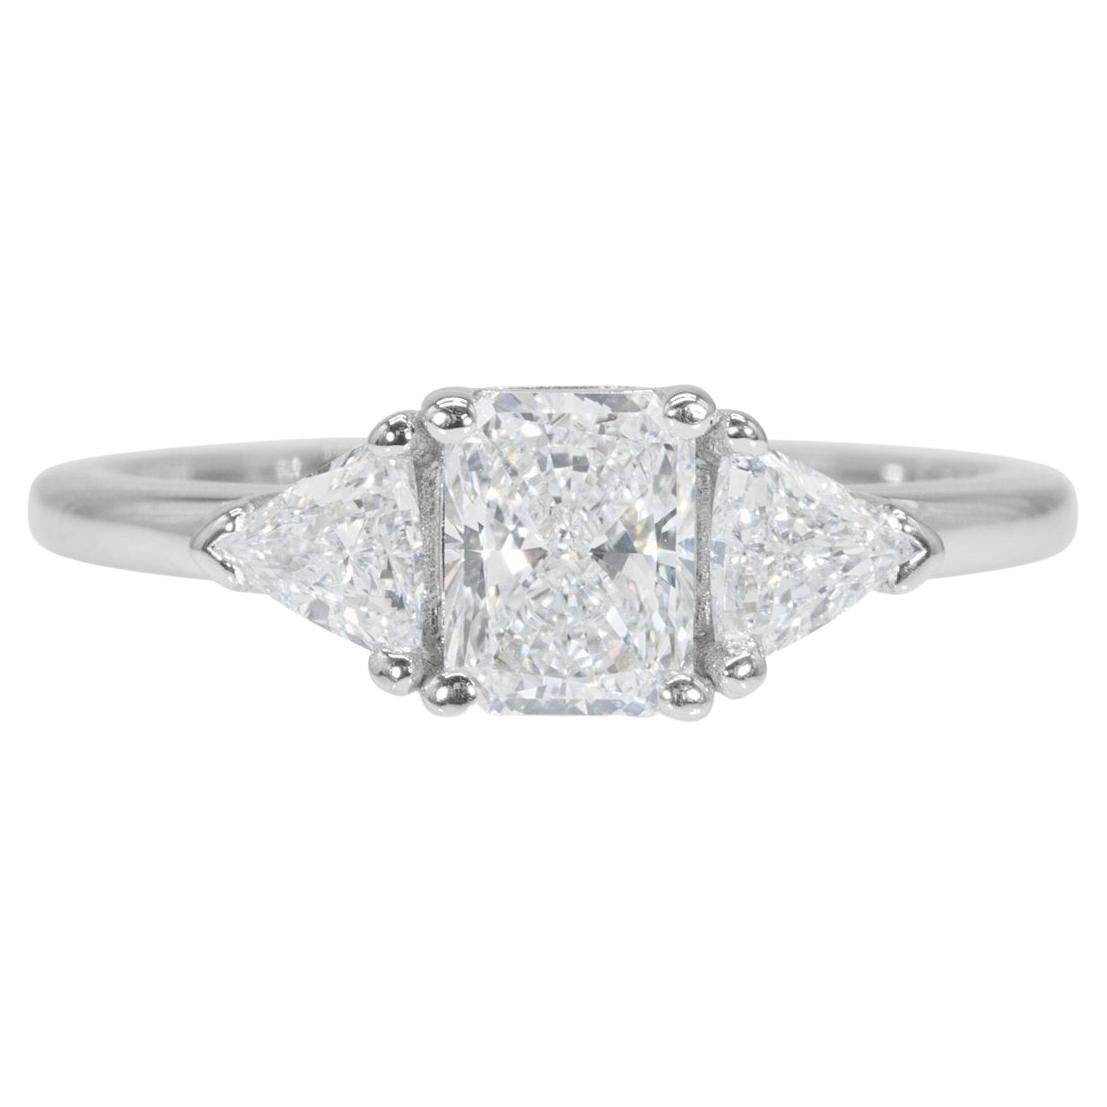 Sparkling 18k White Gold 3 Stone Ring with 0.80 Ct Natural Diamonds GIA Cert For Sale